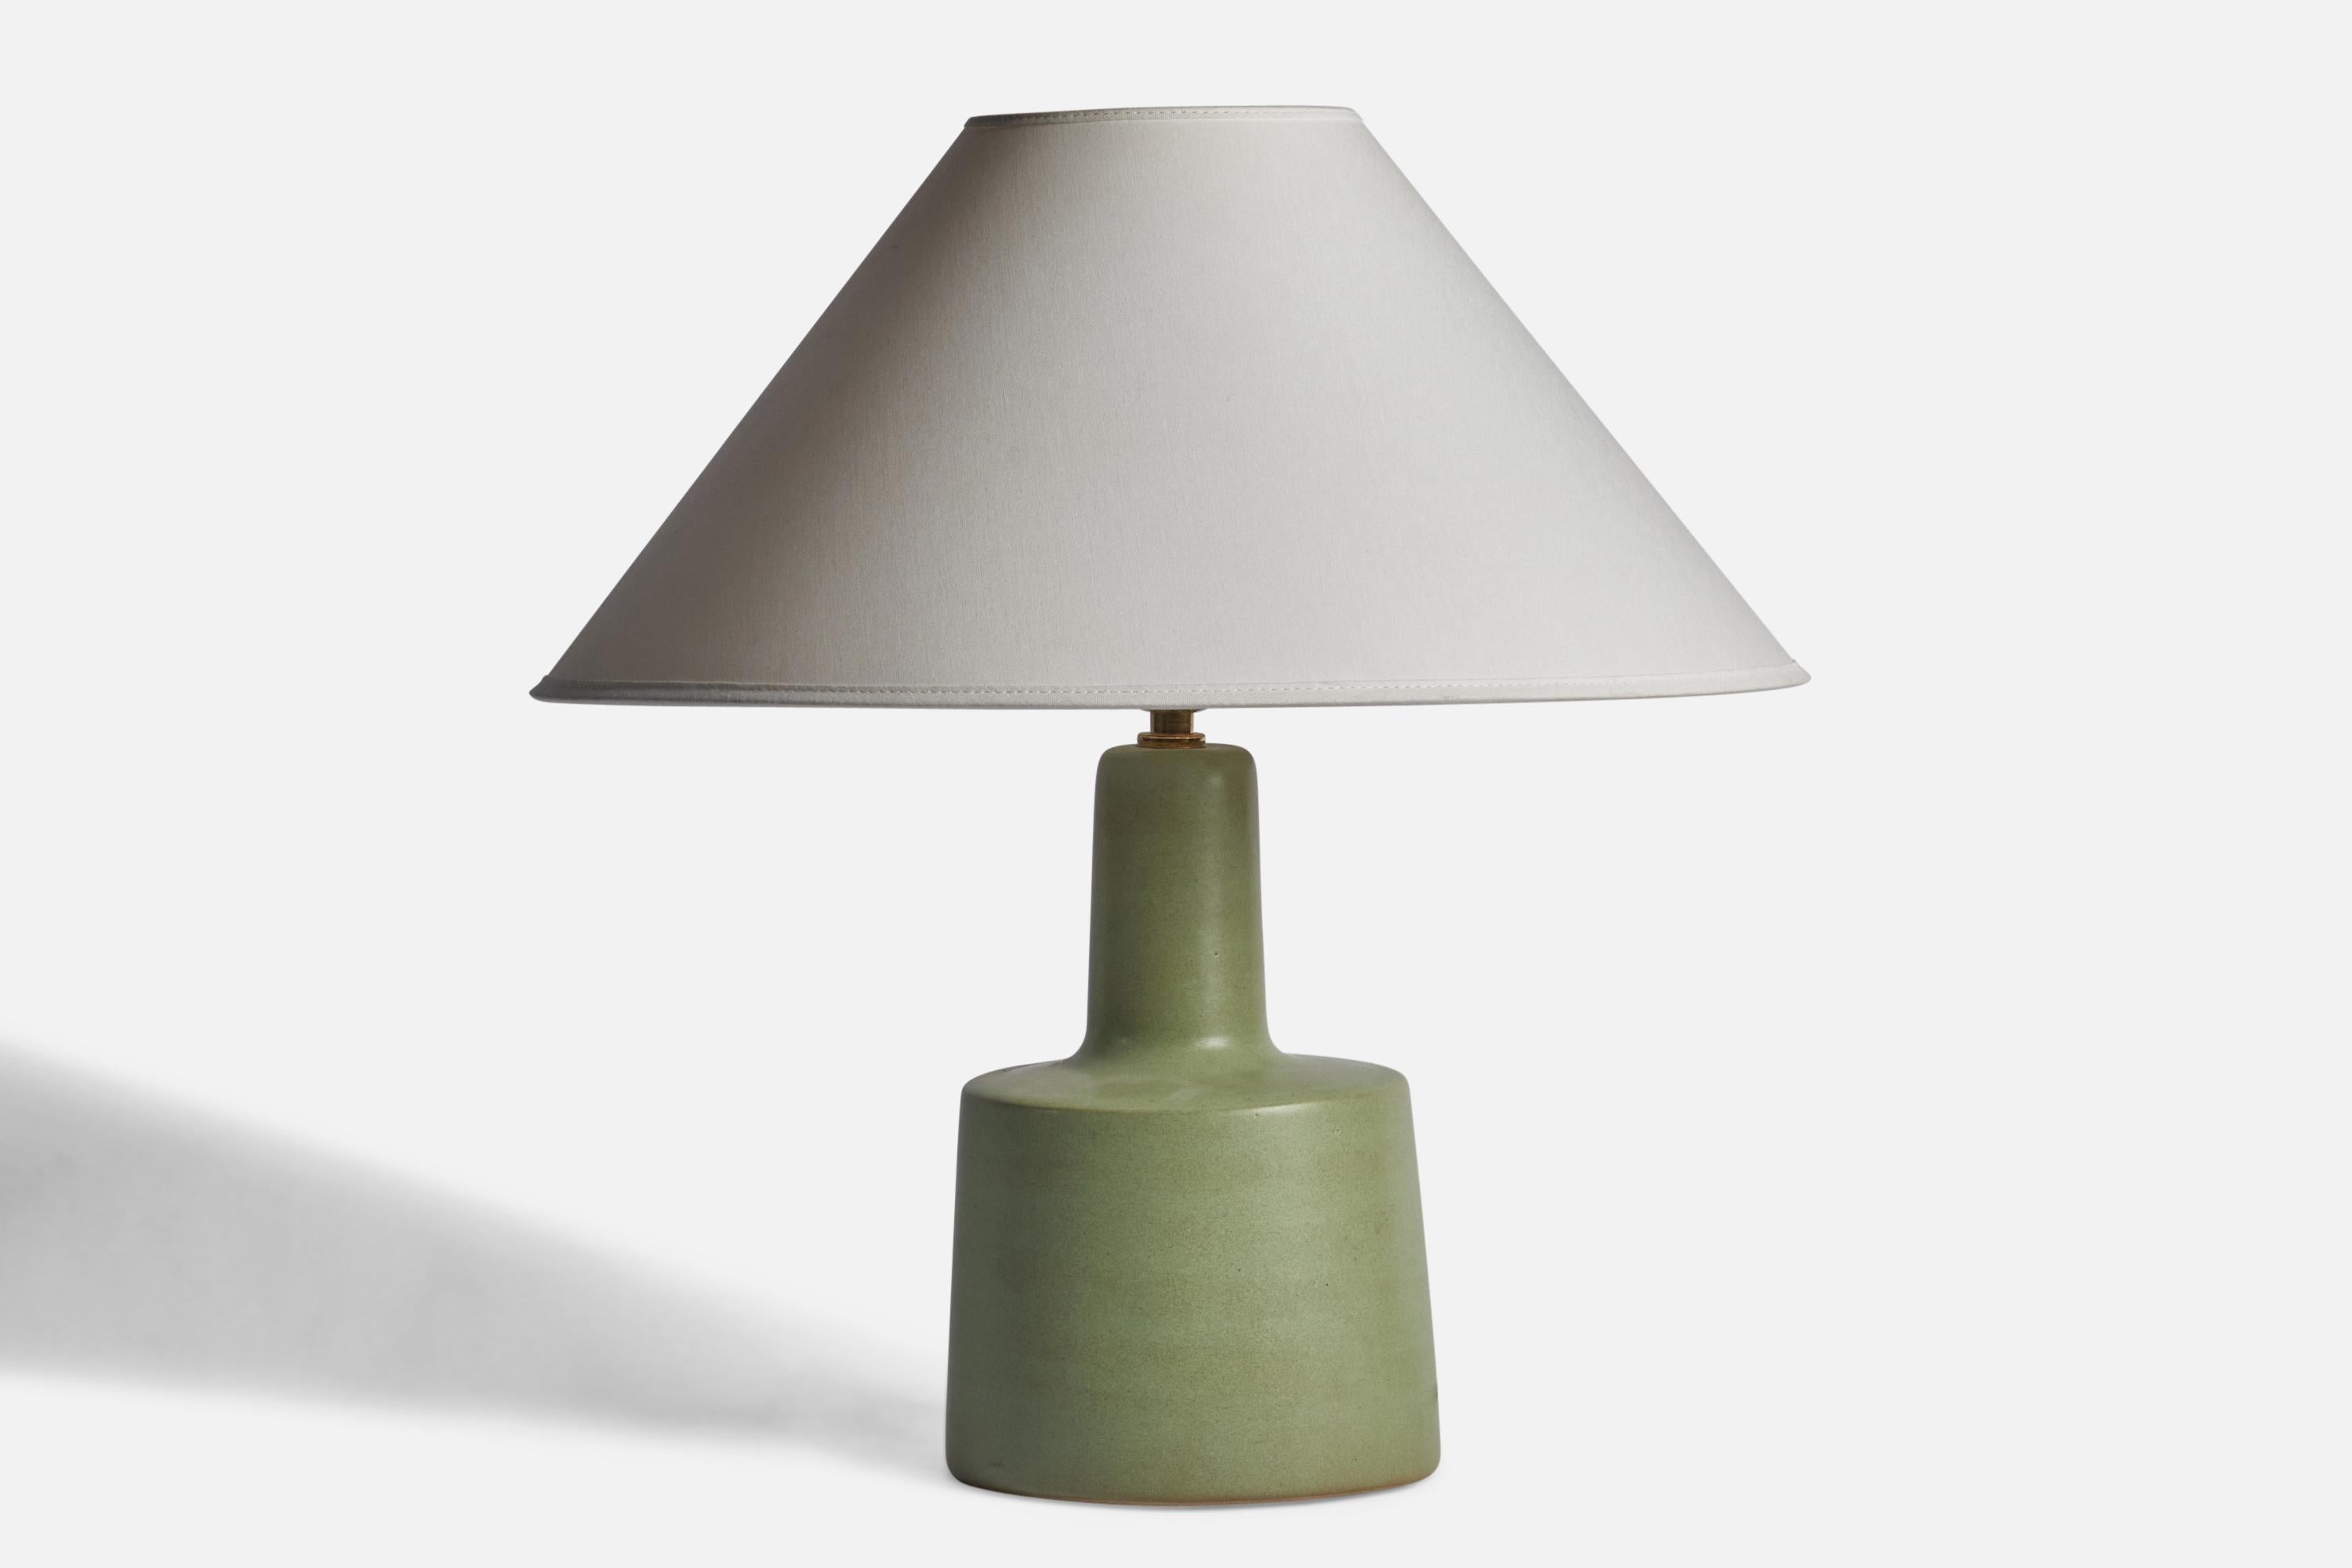 A green-glazed ceramic table lamp designed by Jane & Gordon Martz and produced by Marshall Studios, USA, 1960s.

Dimensions of Lamp (inches): 12.25” H x 6” Diameter
Dimensions of Shade (inches): 9” Top Diameter x 12” Bottom Diameter x 9”